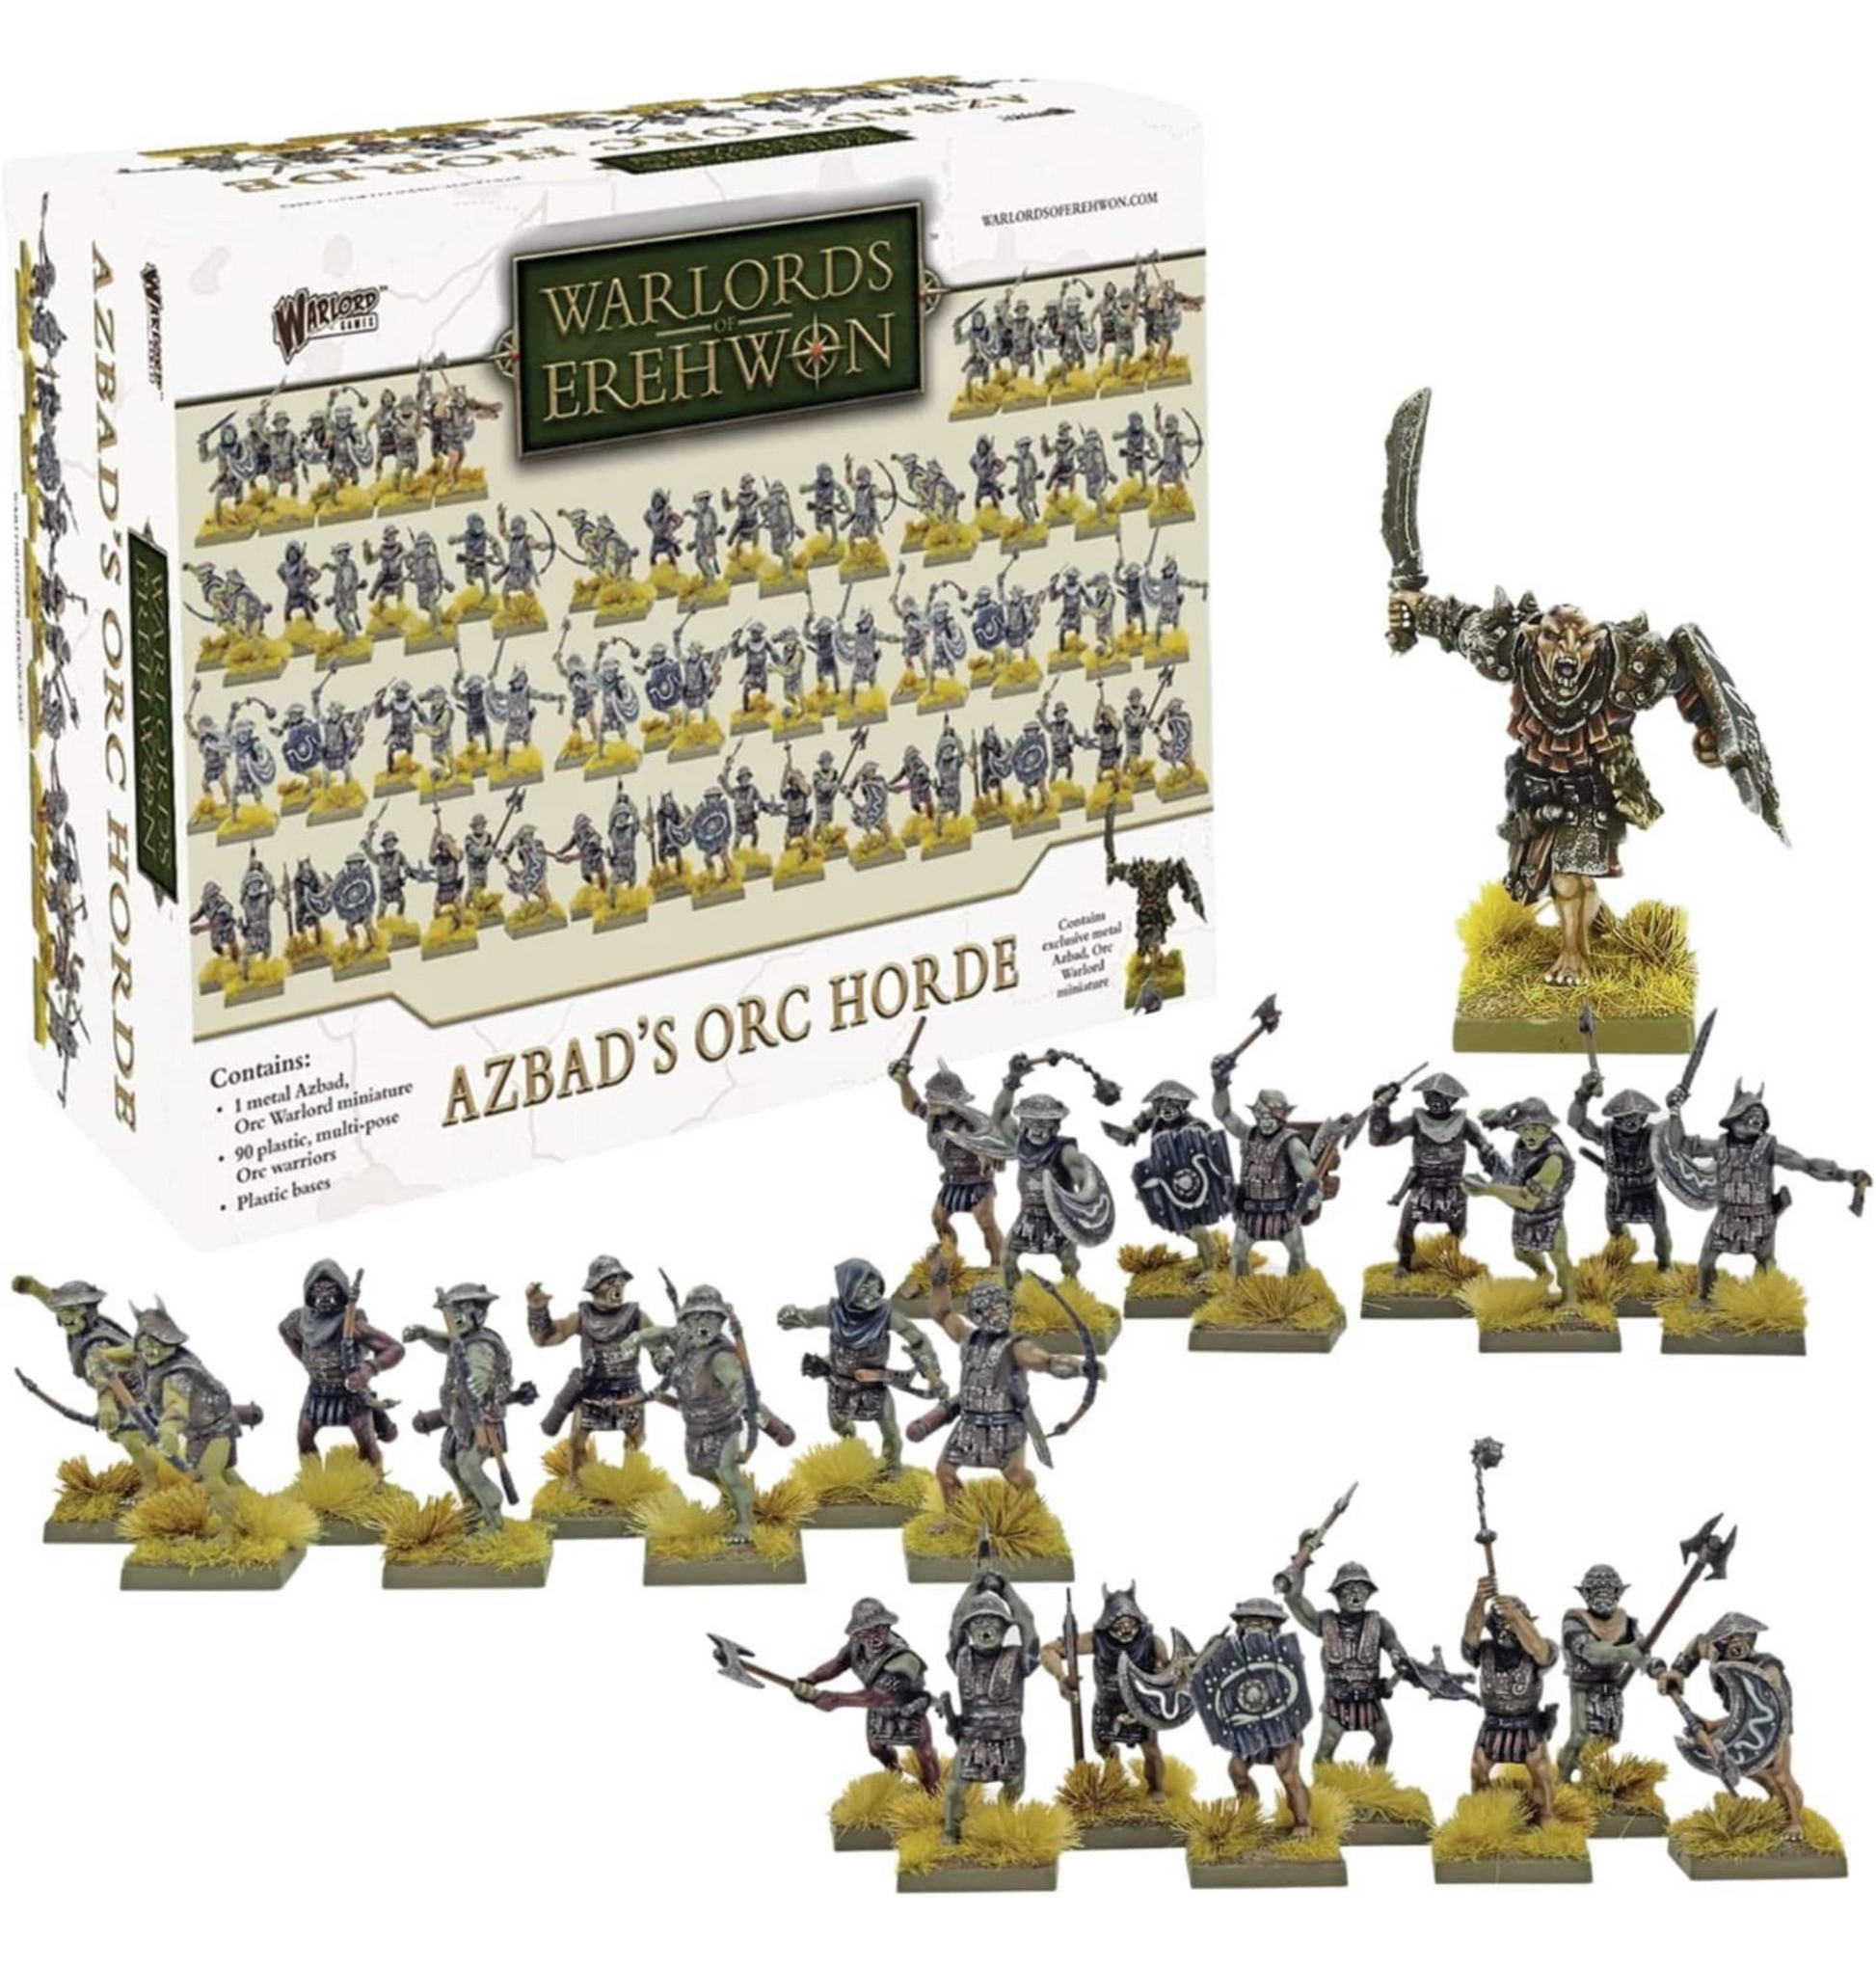 Warlords of Erehwon: Azbad's Orc Horde